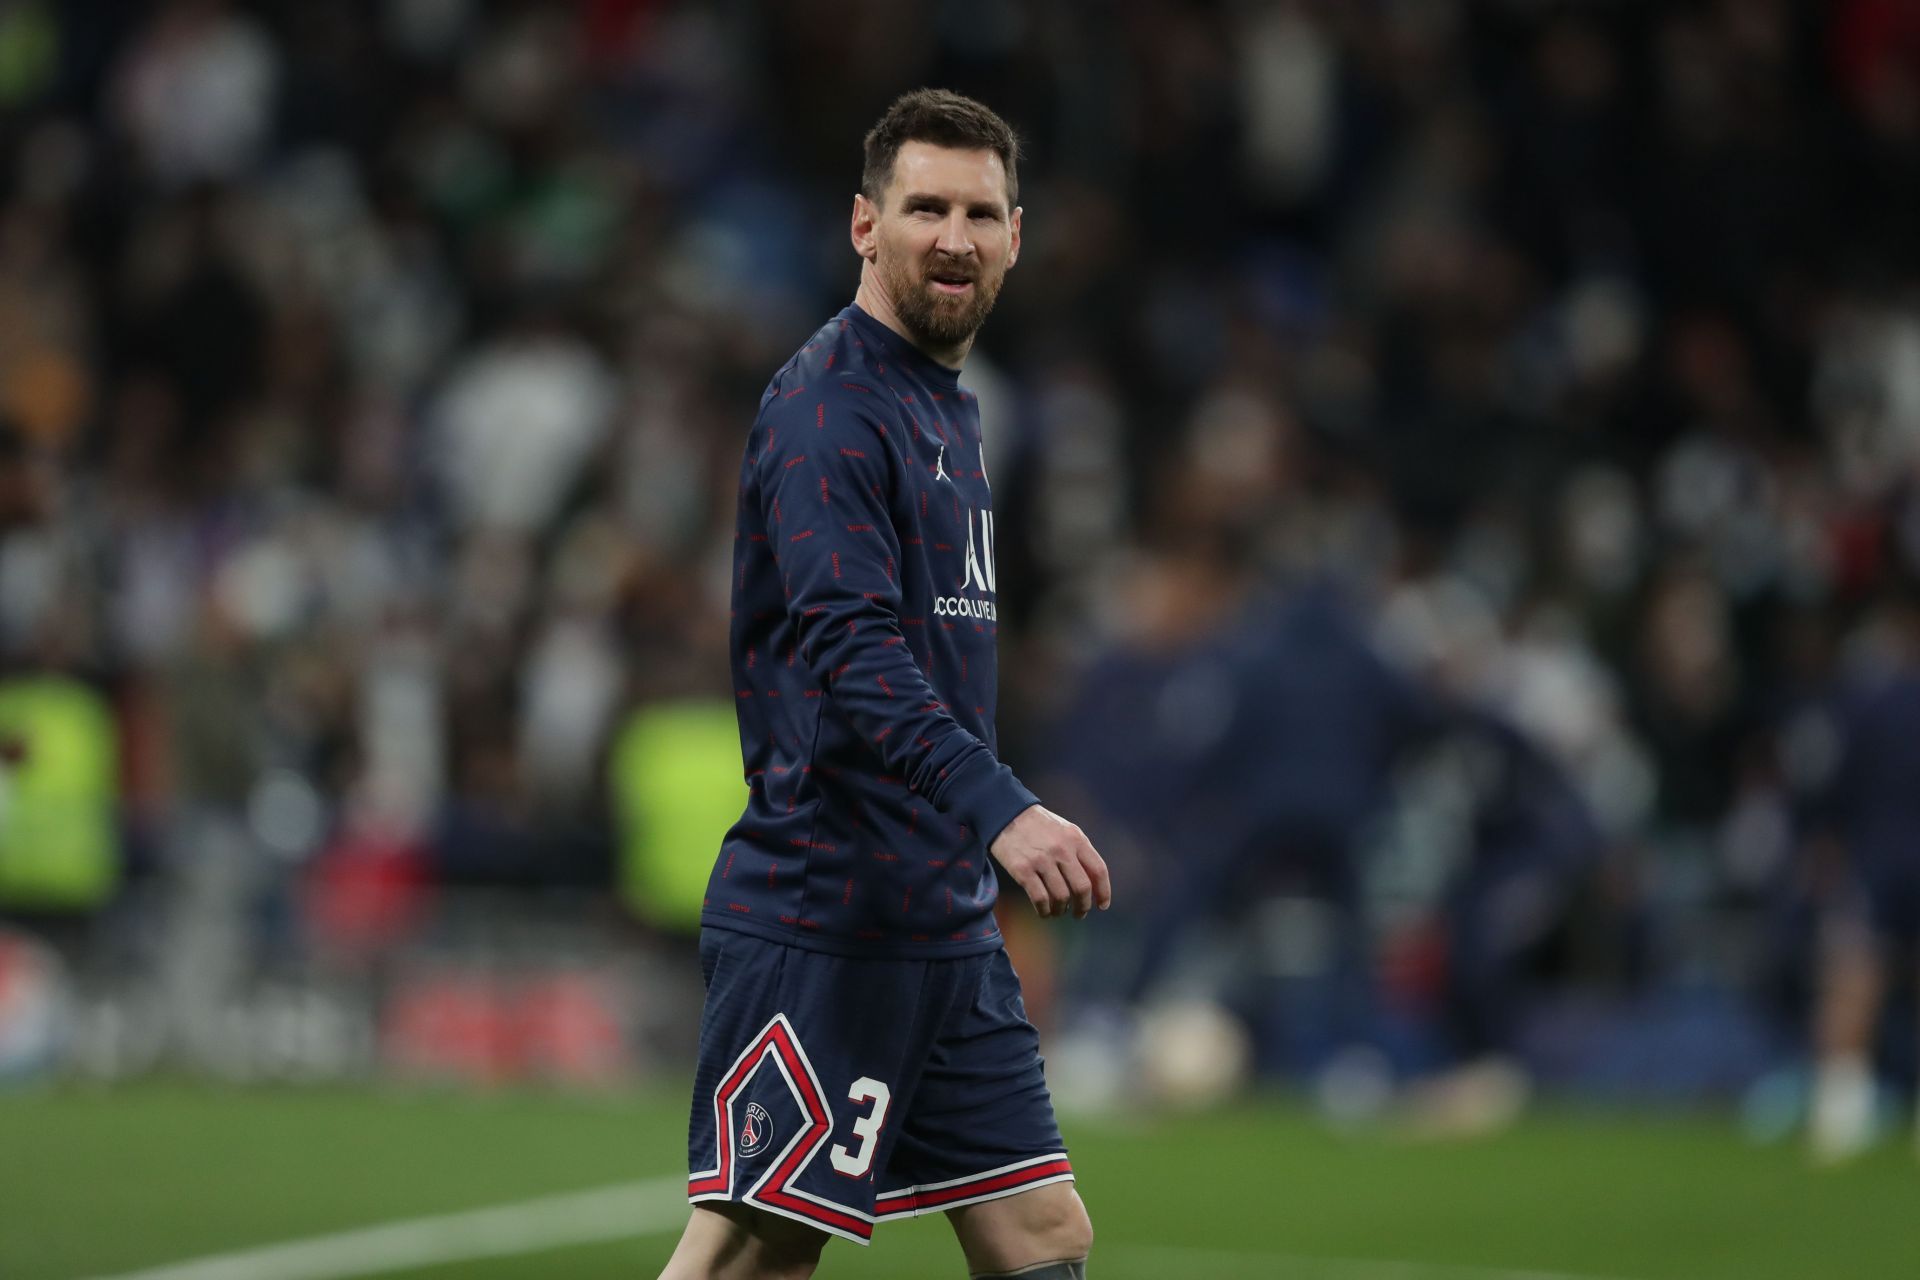 Lionel Messi could not inspire PSG to a Champions League triumph this season